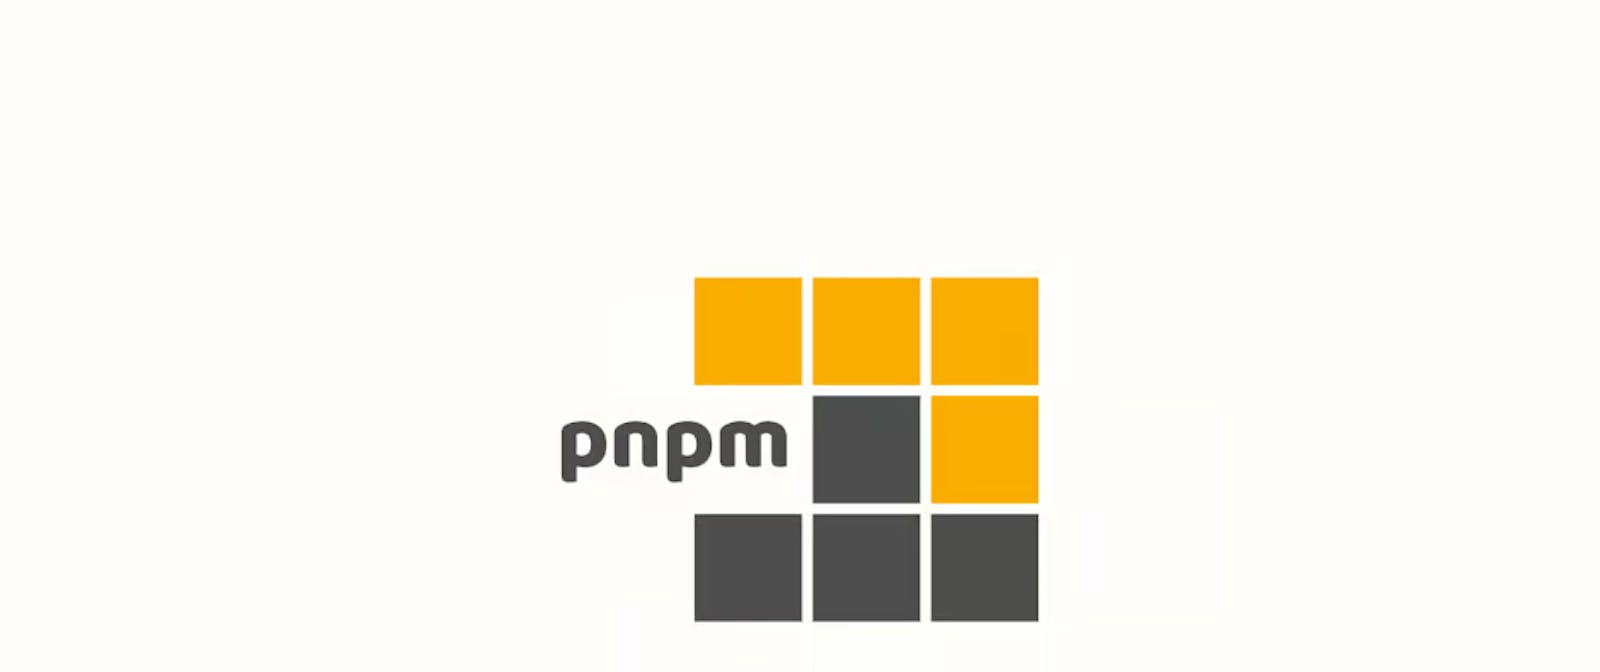 From NPM to PNMP: Speeding Up My 
Package Manager, One Letter at a Time!